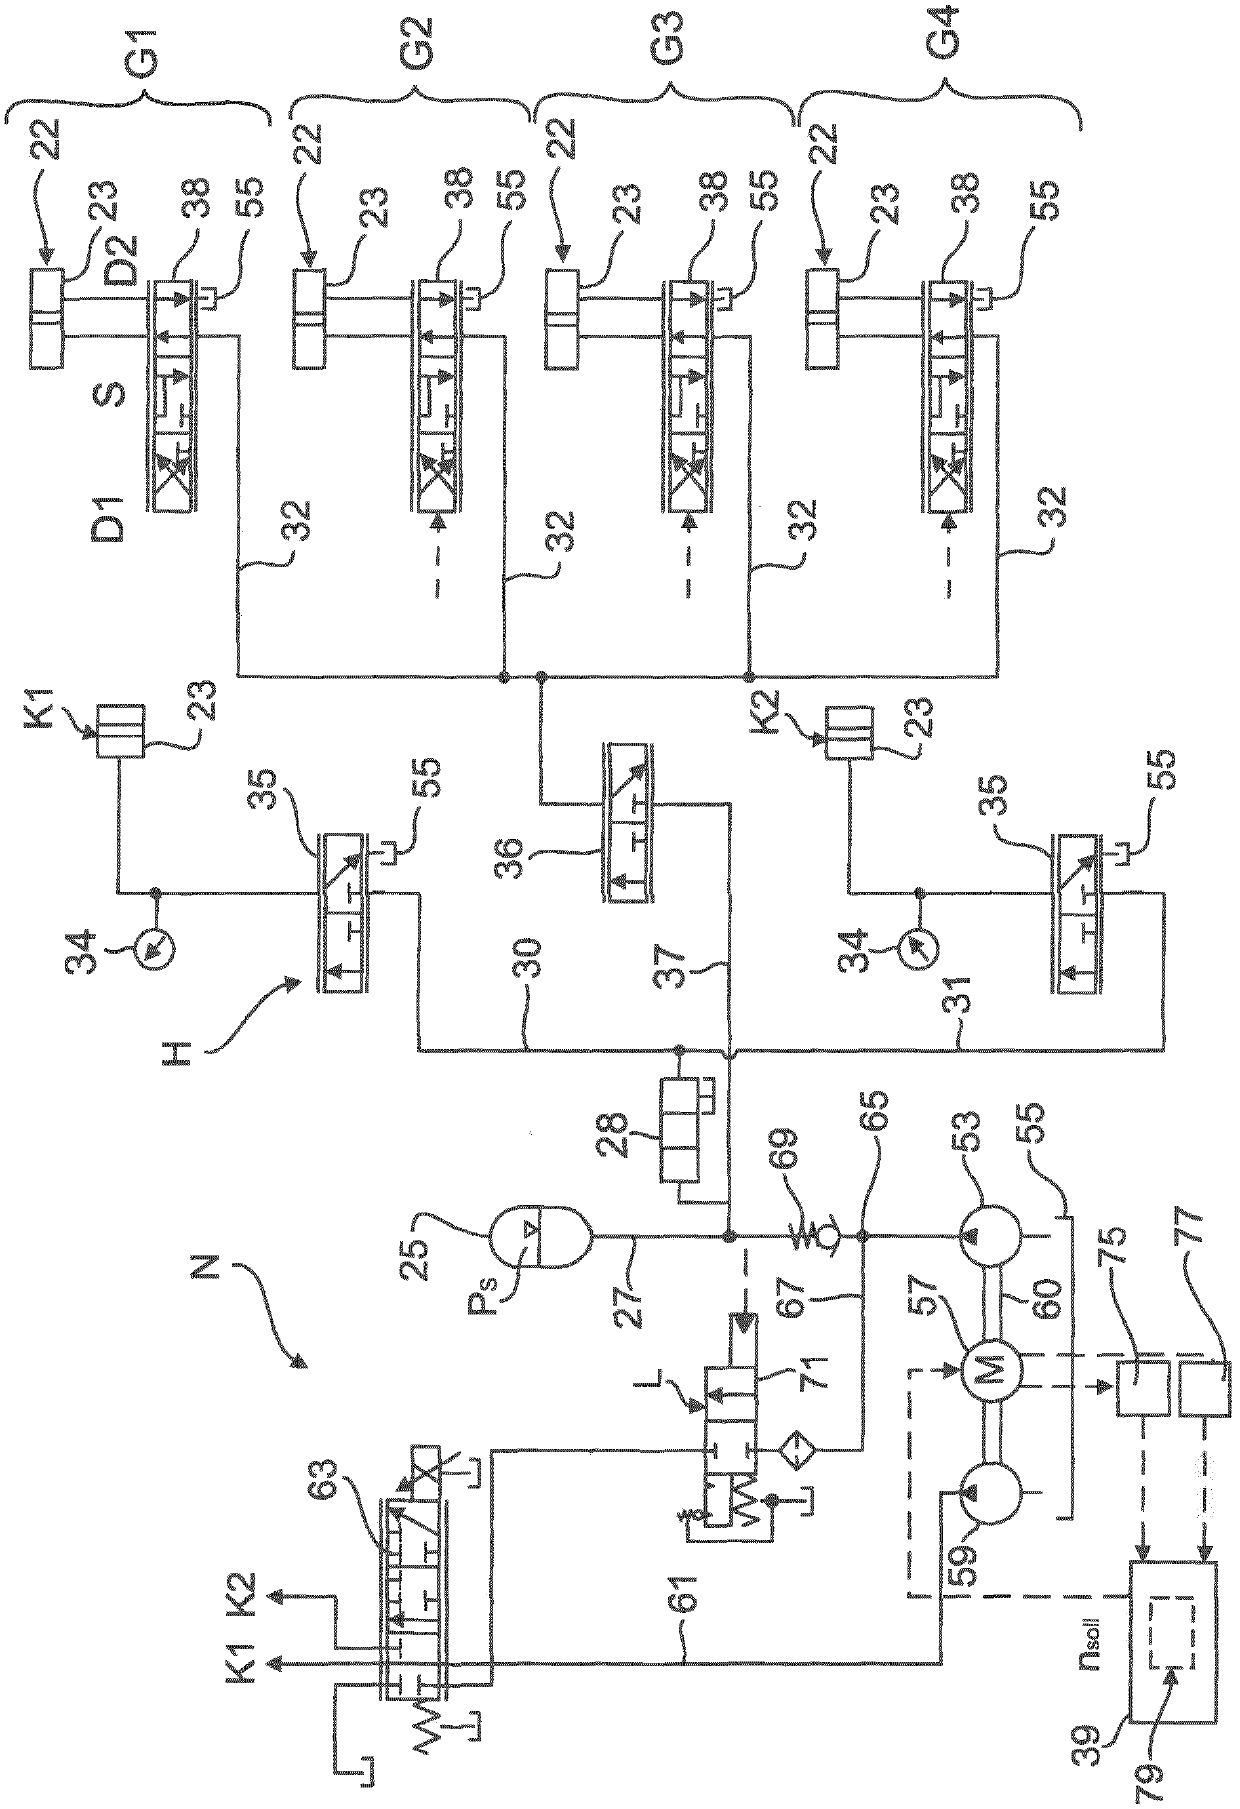 Hydraulic system for an automatic gearbox of a motor vehicle